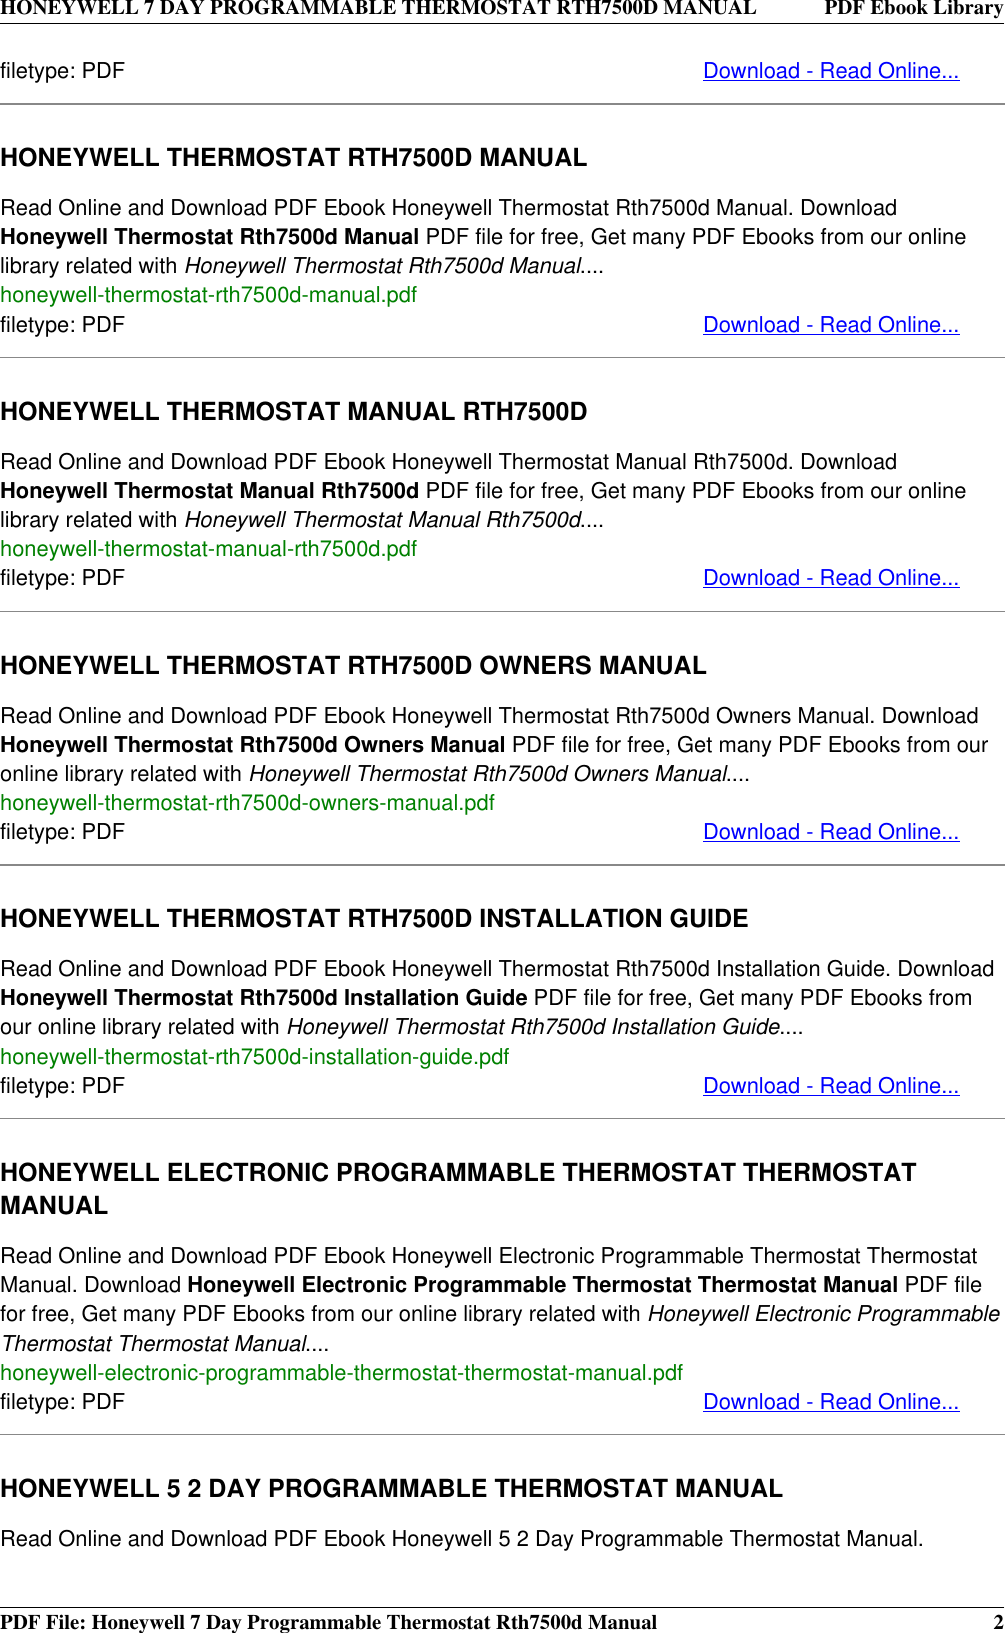 Page 2 of 4 - Honeywell Honeywell-Honeywell-Thermostat-Rth7500D-Users-Manual- 7 DAY PROGRAMMABLE THERMOSTAT RTH7500D MANUAL  Honeywell-honeywell-thermostat-rth7500d-users-manual